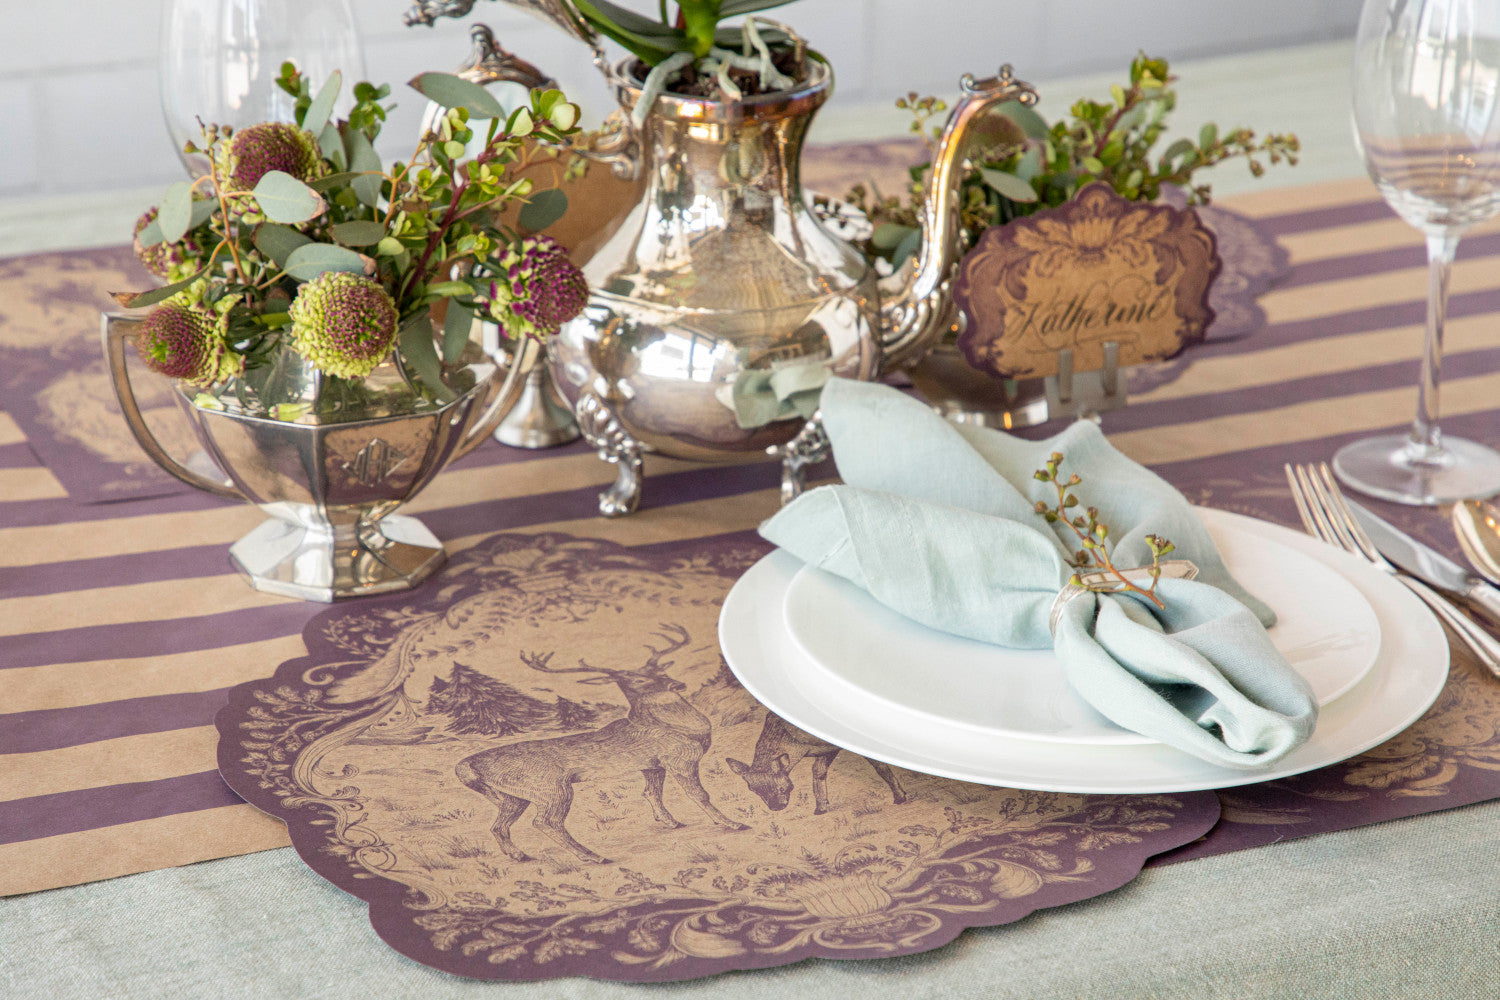 An elegant table setting featuring beautifully arranged plates and silverware showcasing the Hester &amp; Cook Kraft Purple Stripe Runner for entertaining.